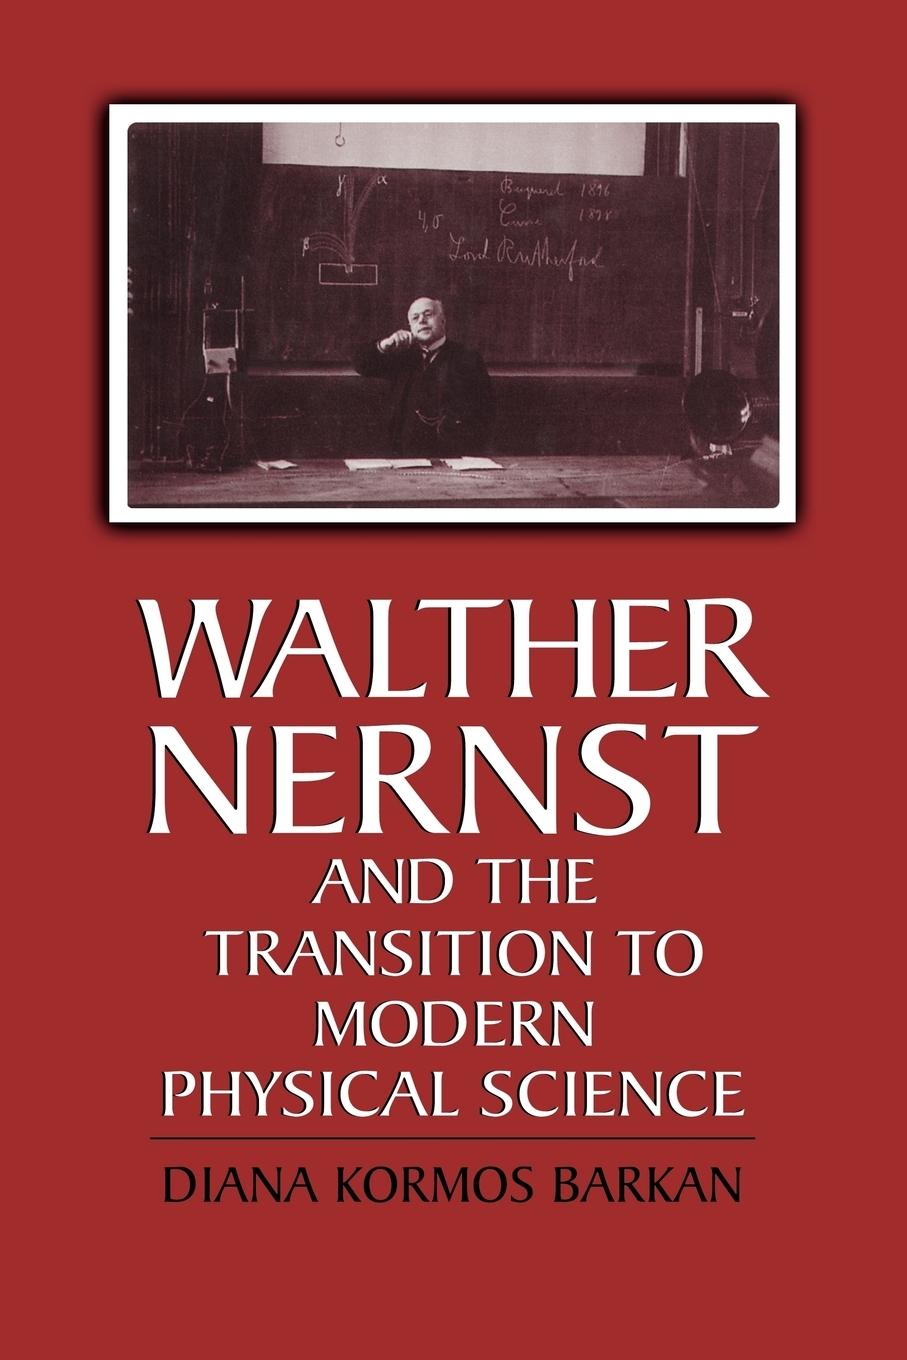 Walther Nernst and the Transition to Modern Physical Science - Barkan, Diana Kormos|Buchwald|Buchwald, Diana Kormos